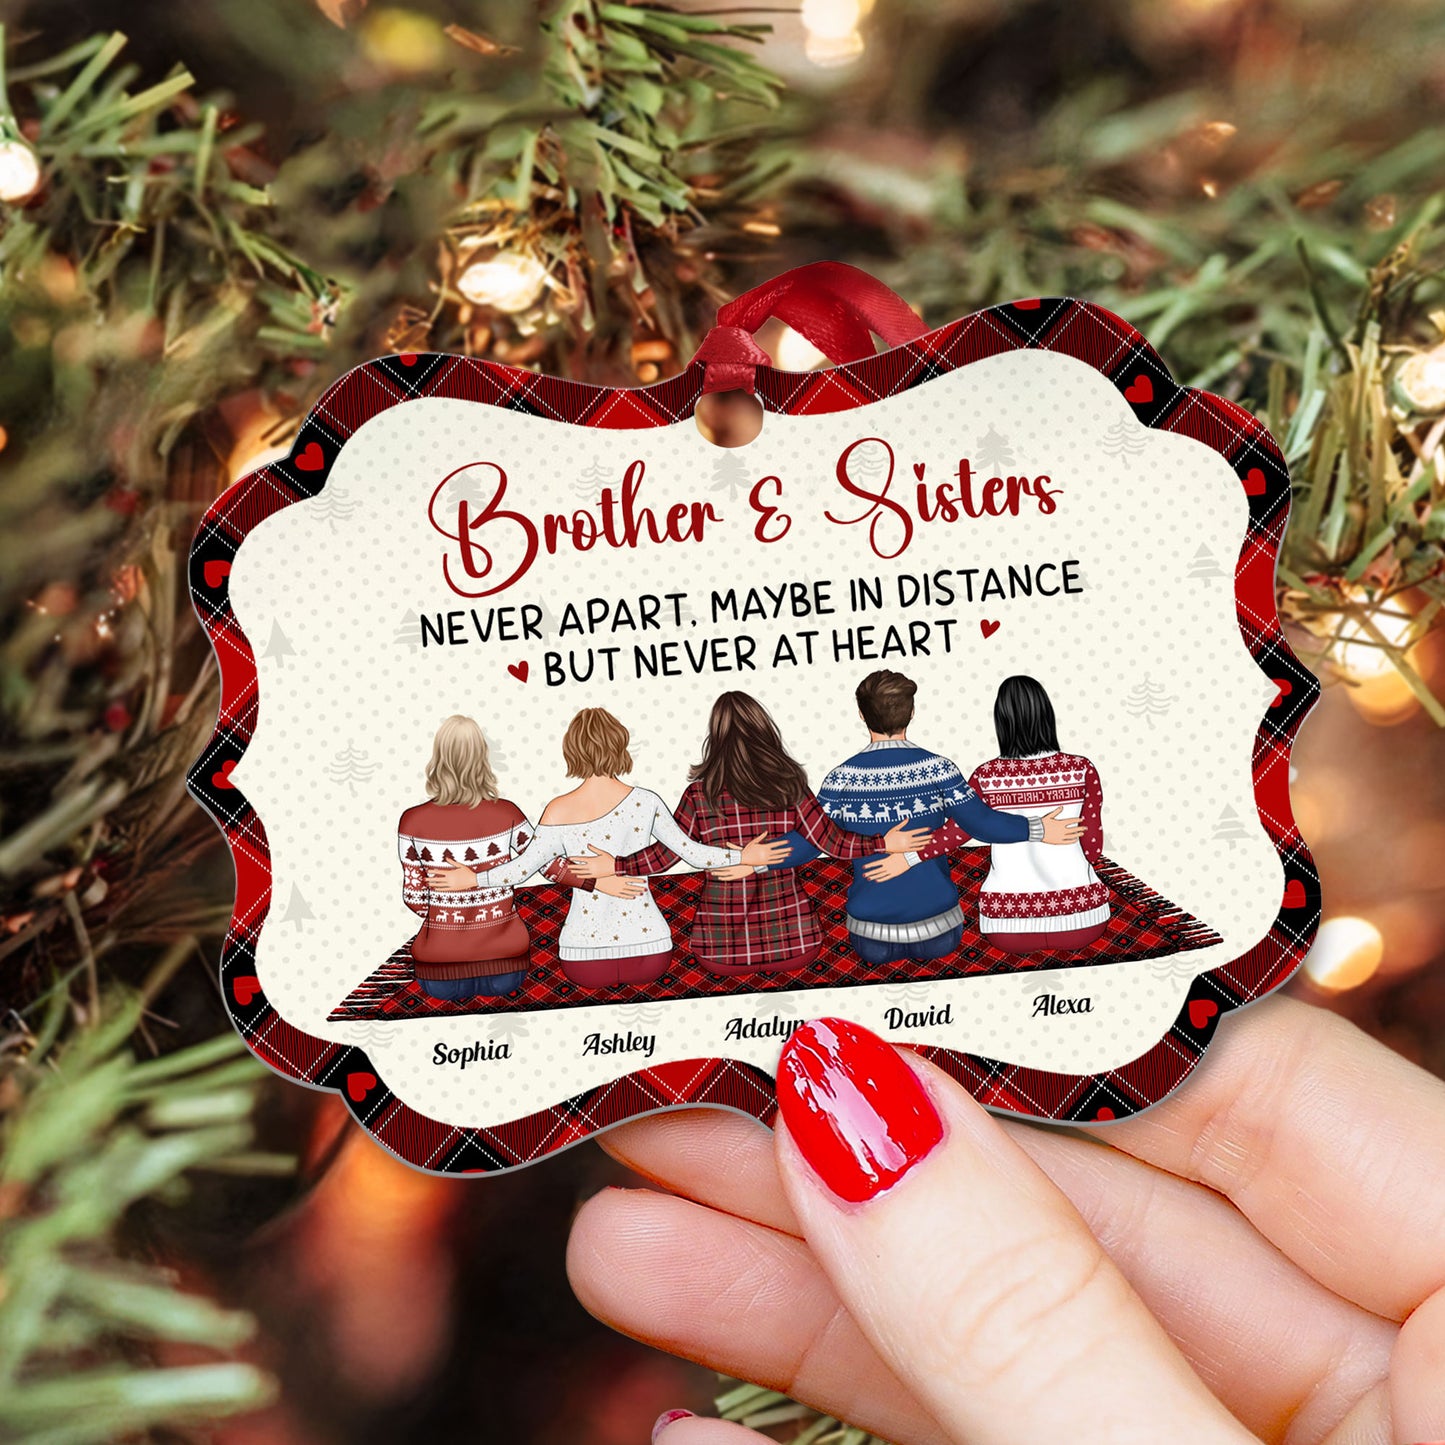 Brother & Sister Never Apart - Personalized Aluminum Ornament